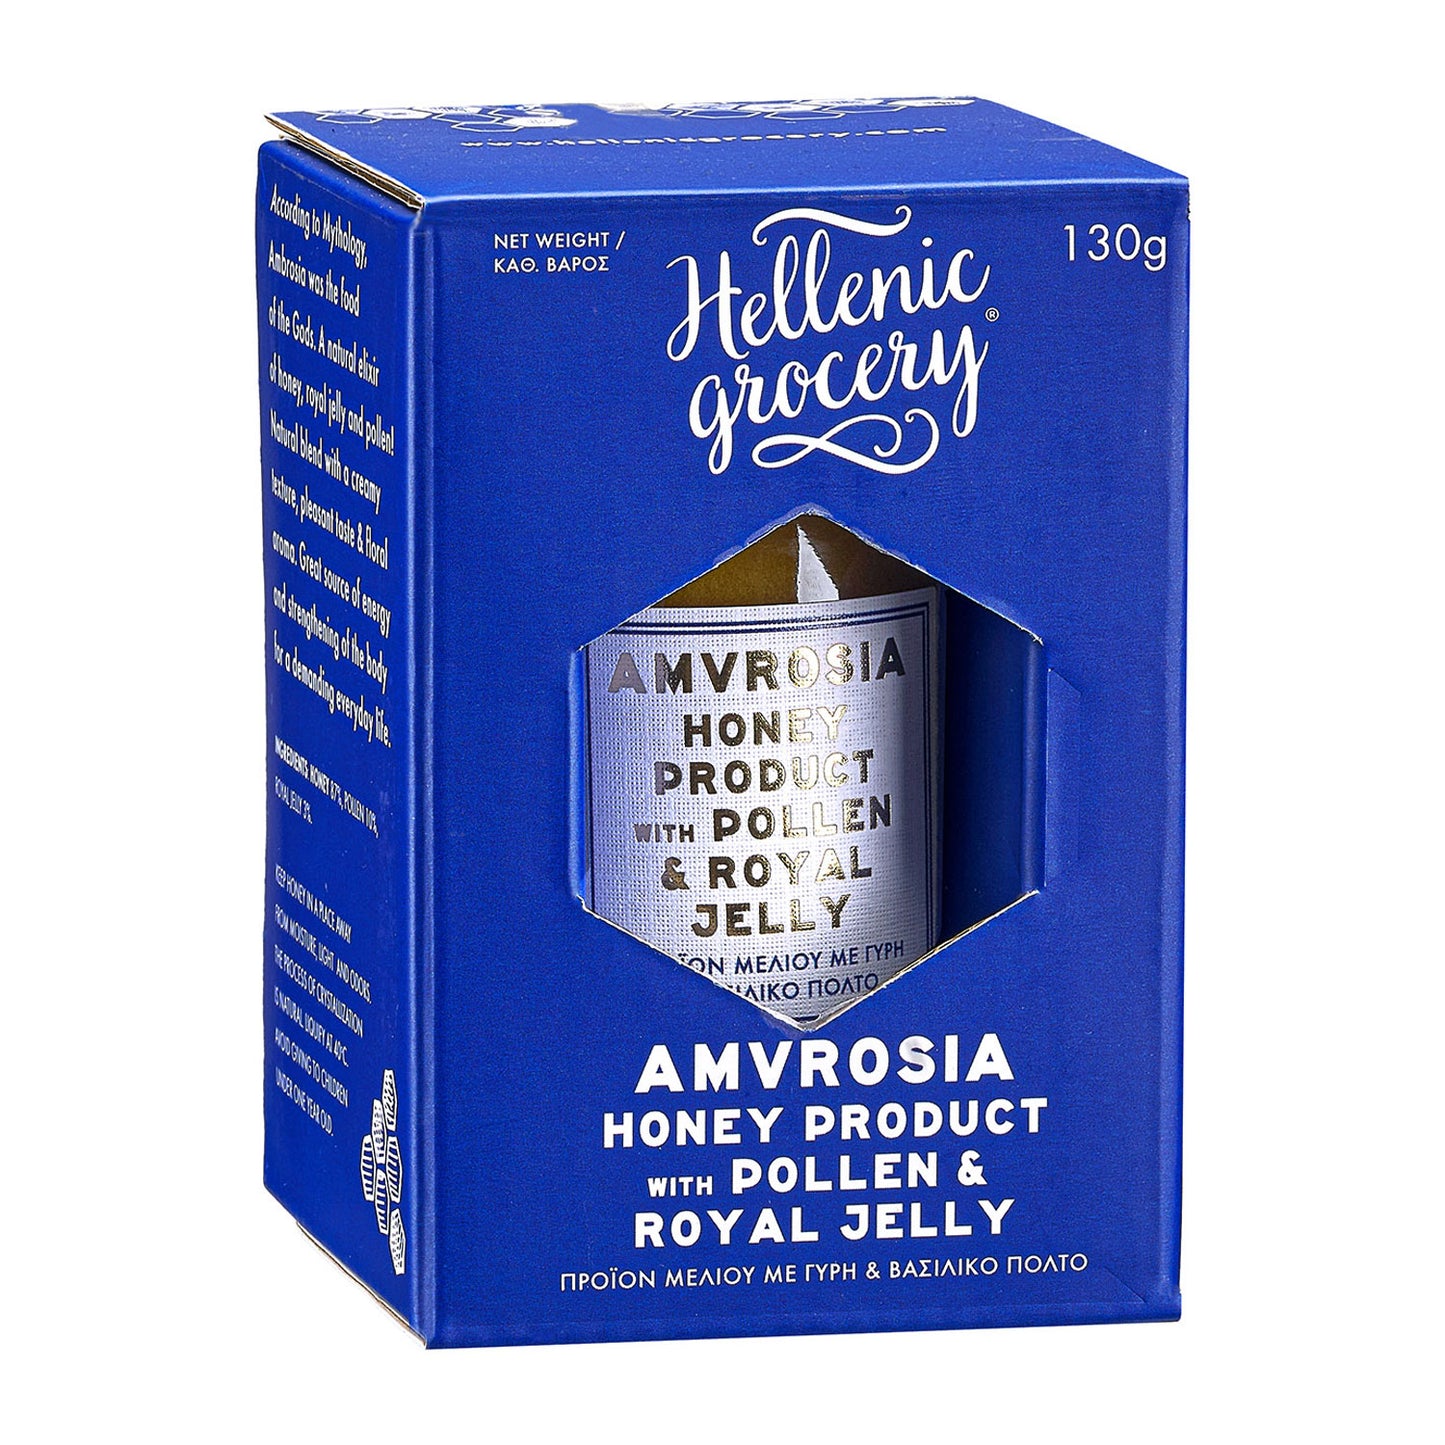 Amvrosia Honey with Pollen and Royal Jelly - 130g - Hellenic Grocery